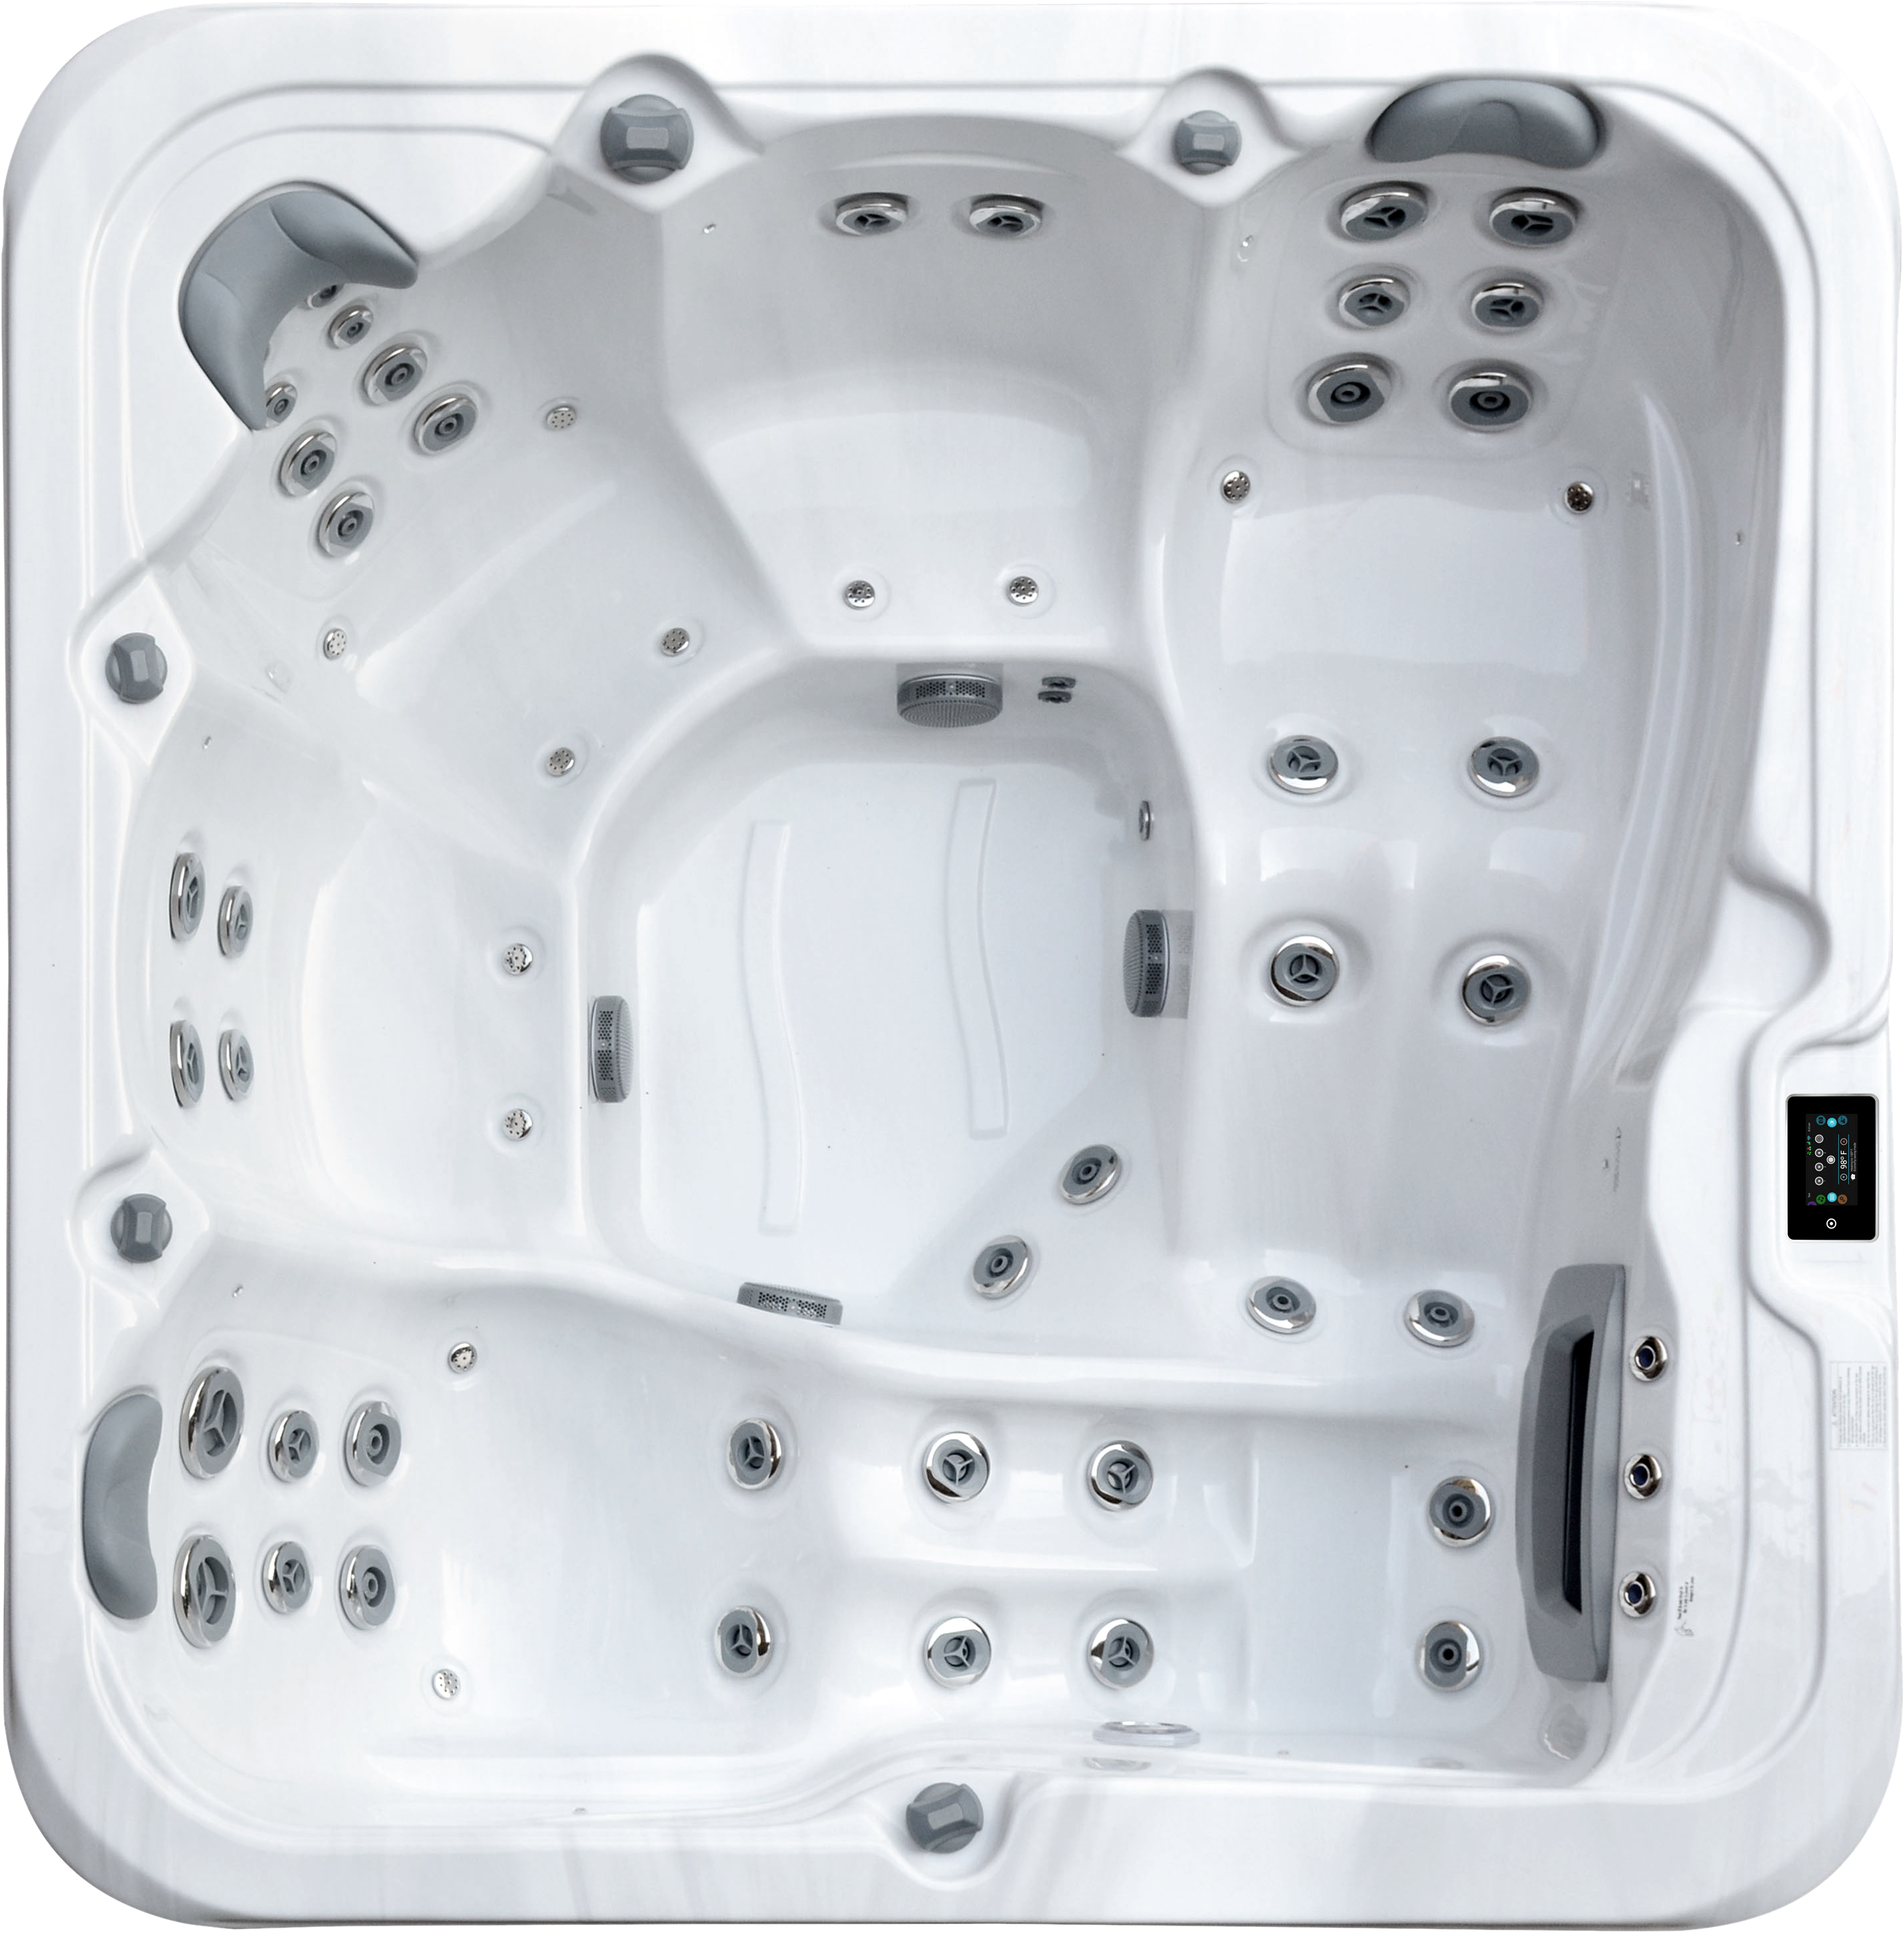 oasis rx-570 hot tub available at hot tub liverpool